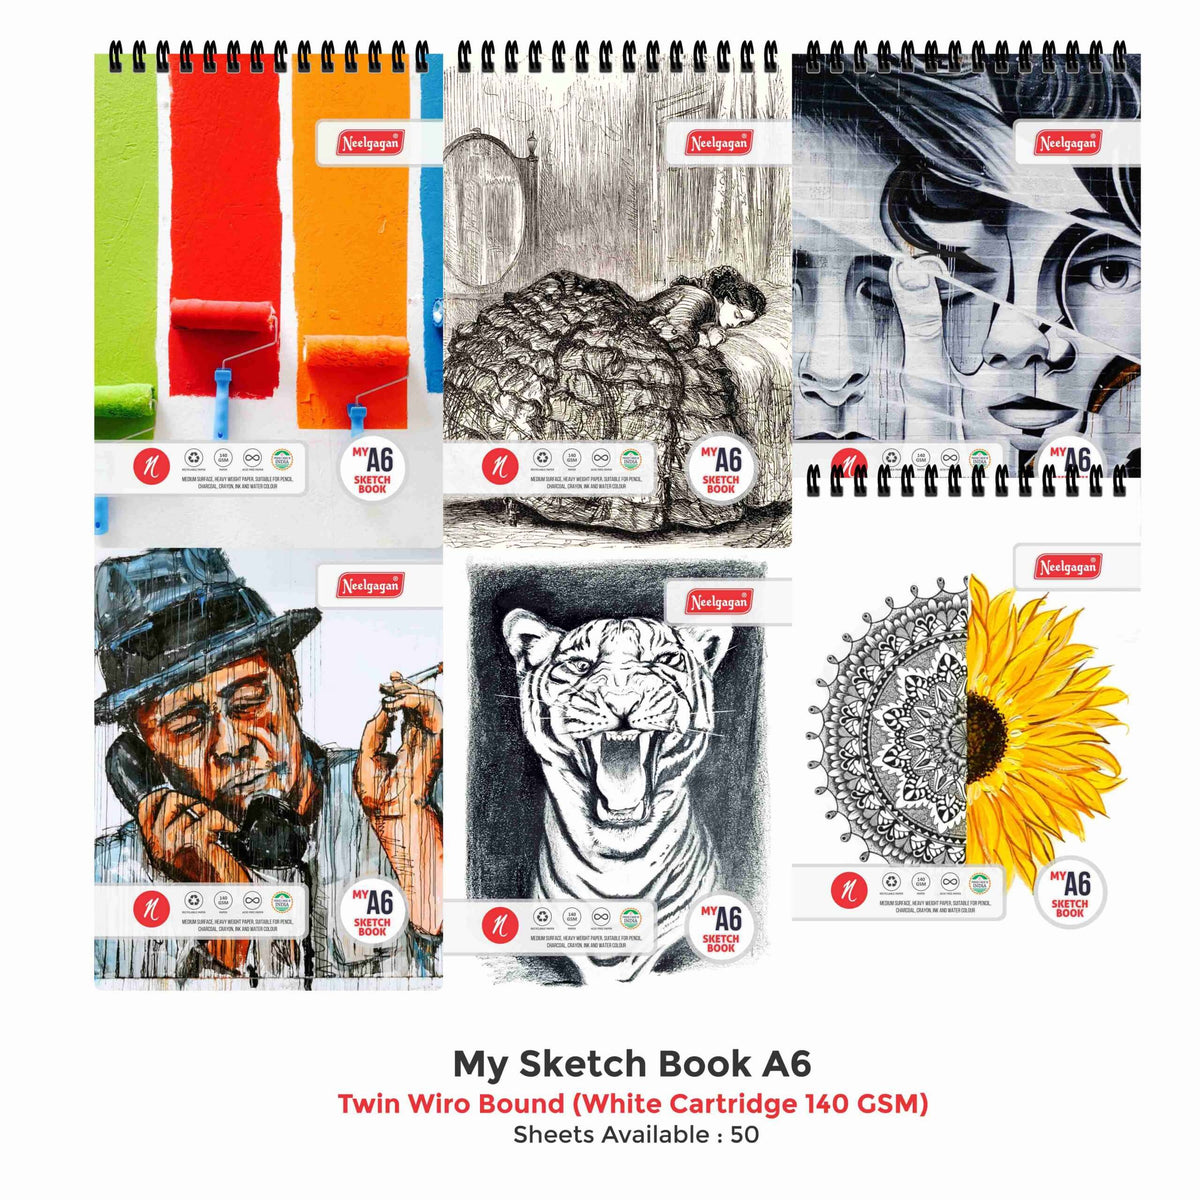 My Sketch Book A6- 50 Sheets (Twin Wiro Bound) (White Cartridge 140 GSM) 14.7cm X 21cm (Suitable for Drawing & Sketching)